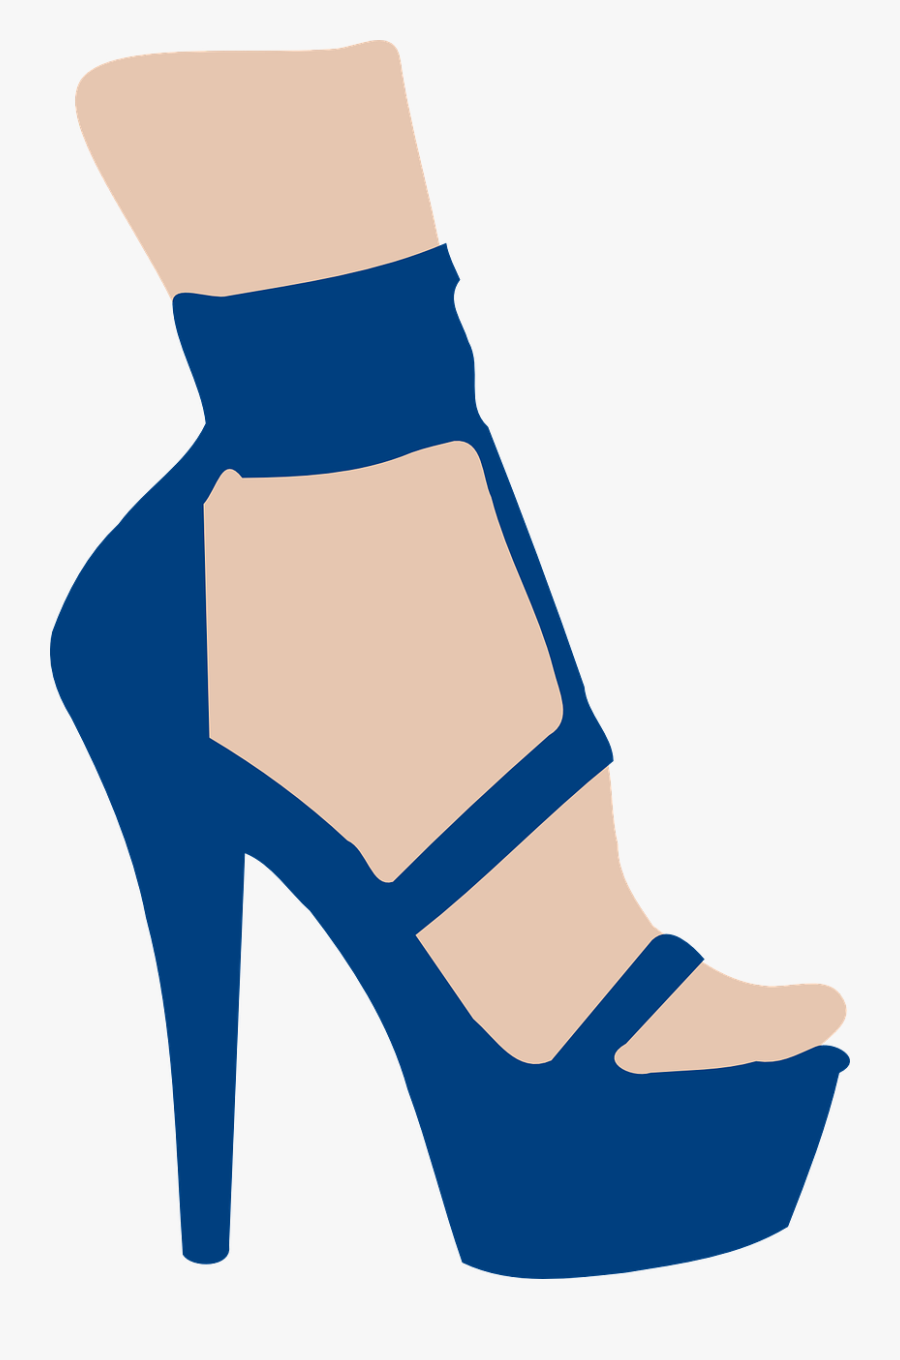 Easy Drawings Of High Heels, Transparent Clipart